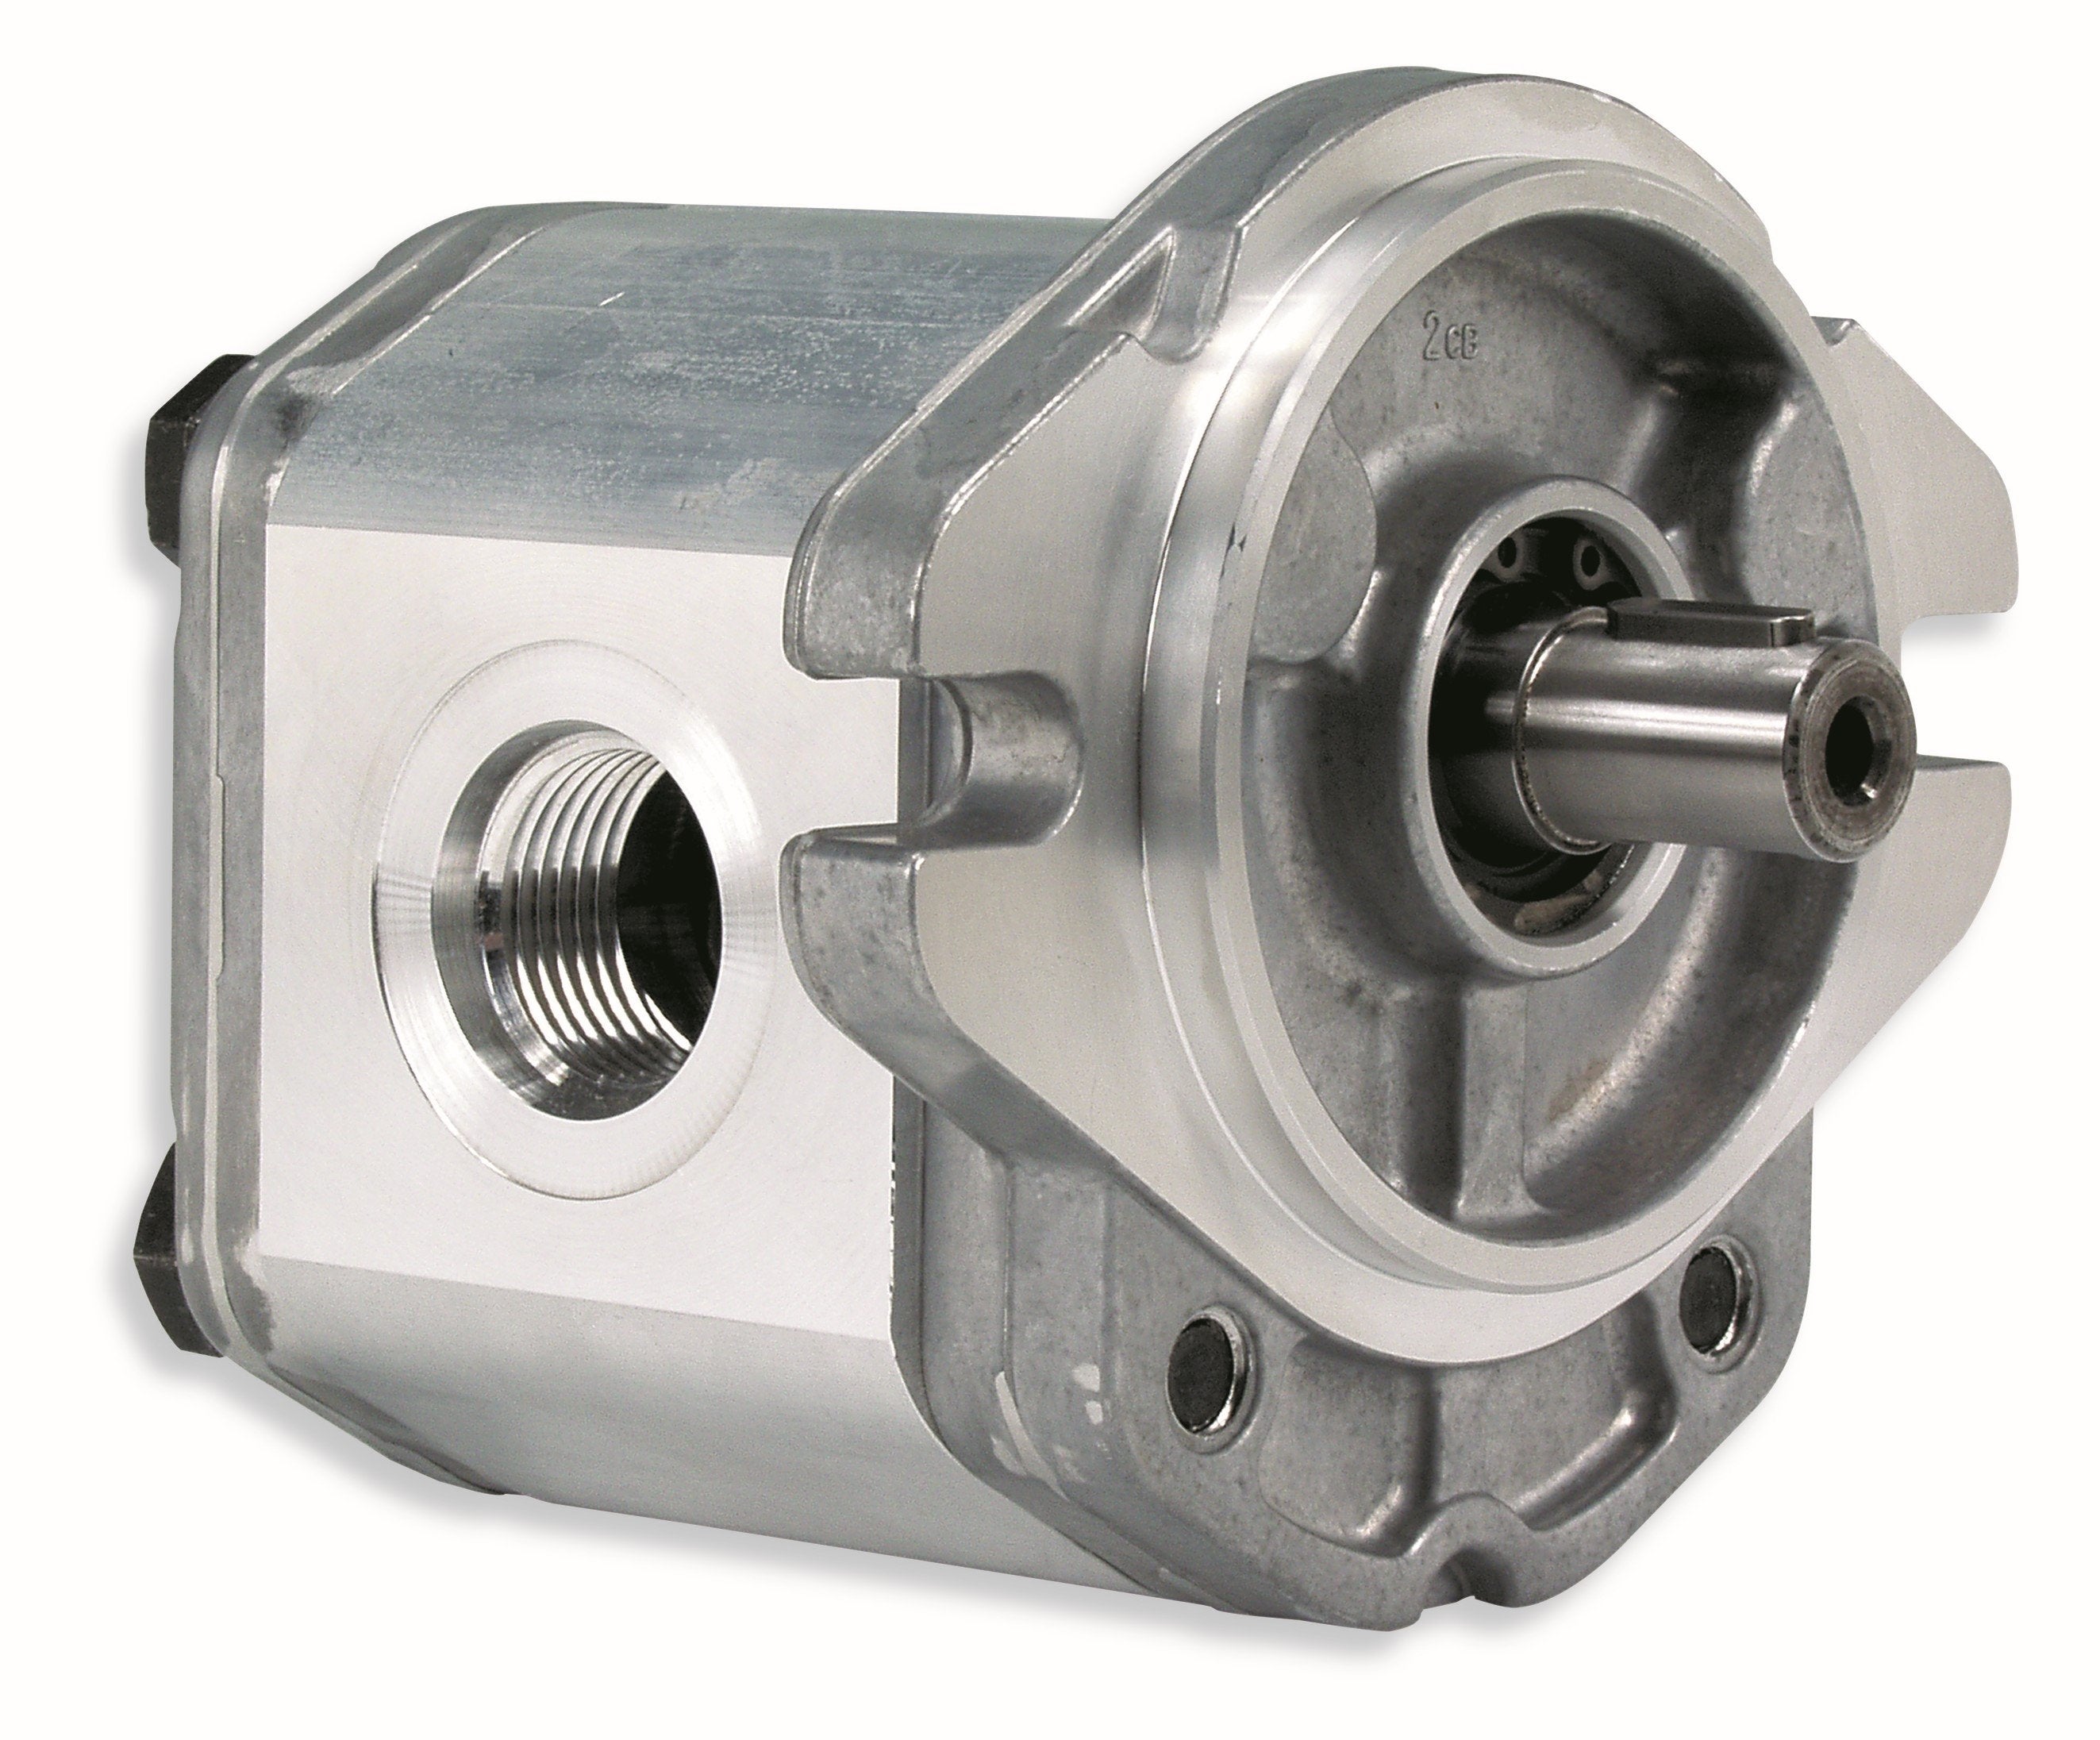 GHM2A-R-40-E2 : Marzocchi Gear Motor, Bidirectional, 28.2cc, 2900psi rated, 1800RPM, 0.75 (3/4") #12 SAE ports, 5/8" Bore x 5/32" Keyed Shaft